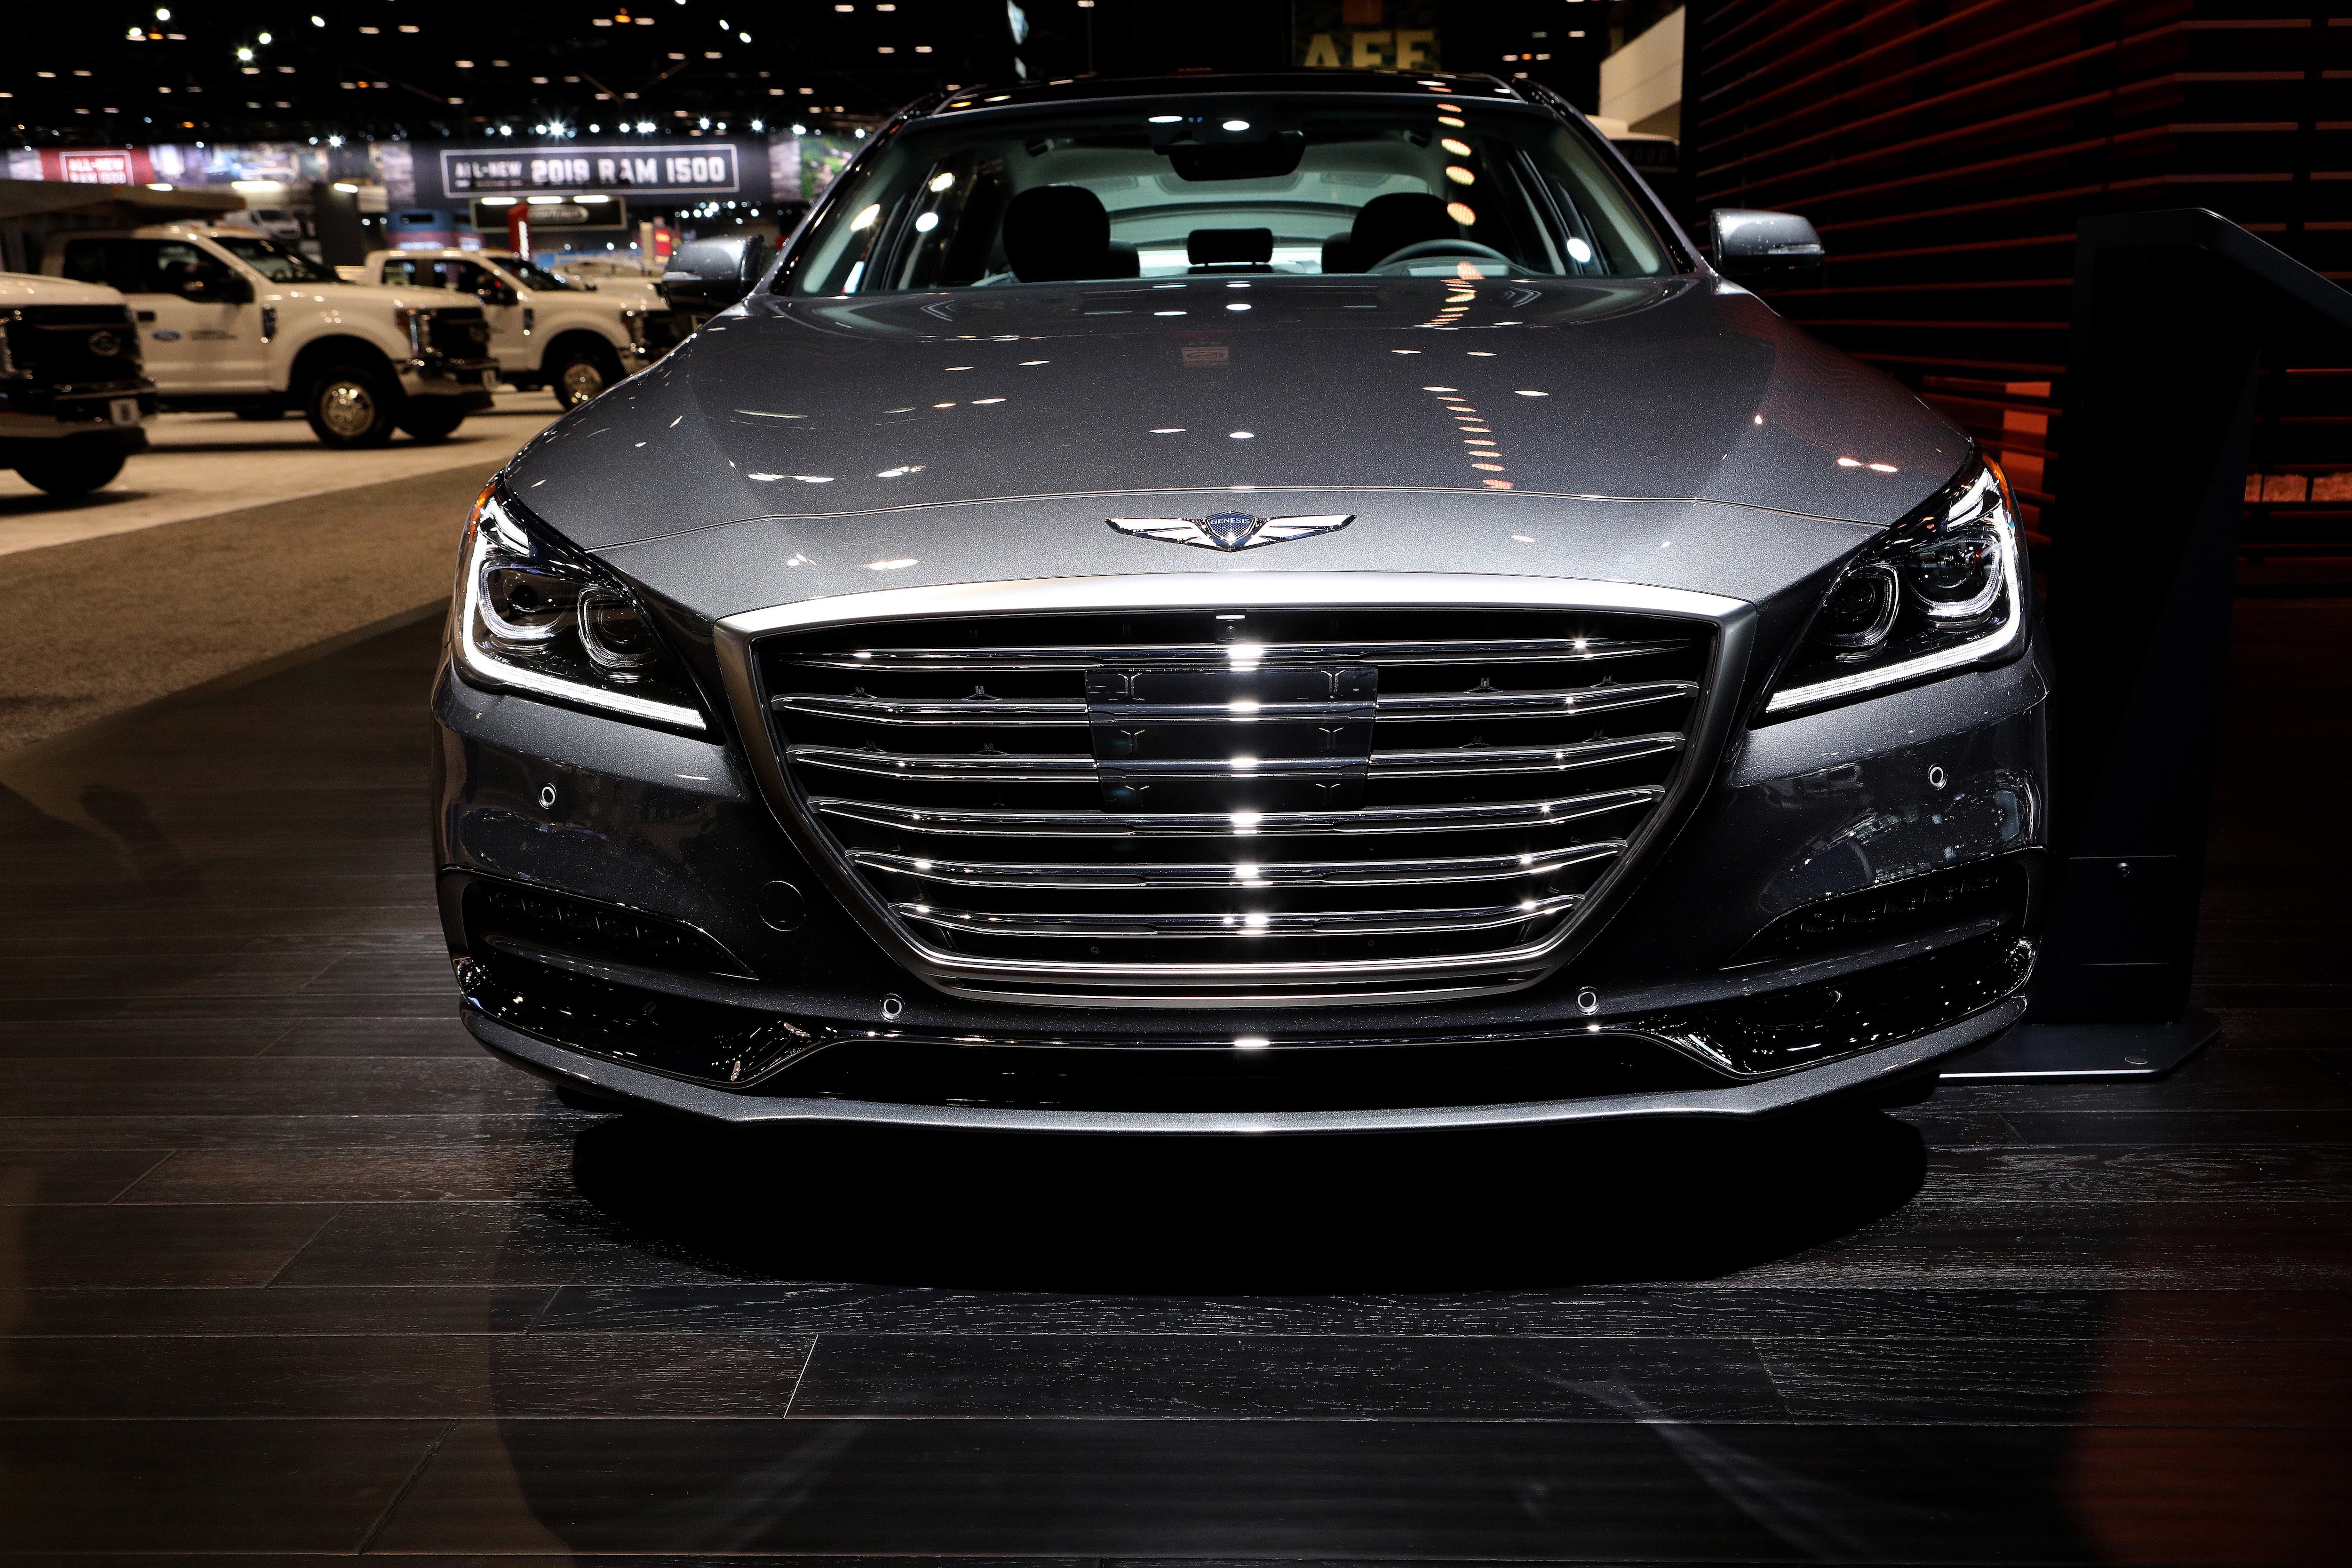 The 2018 Genesis G80 on display at the 2018 Chicago Auto Show